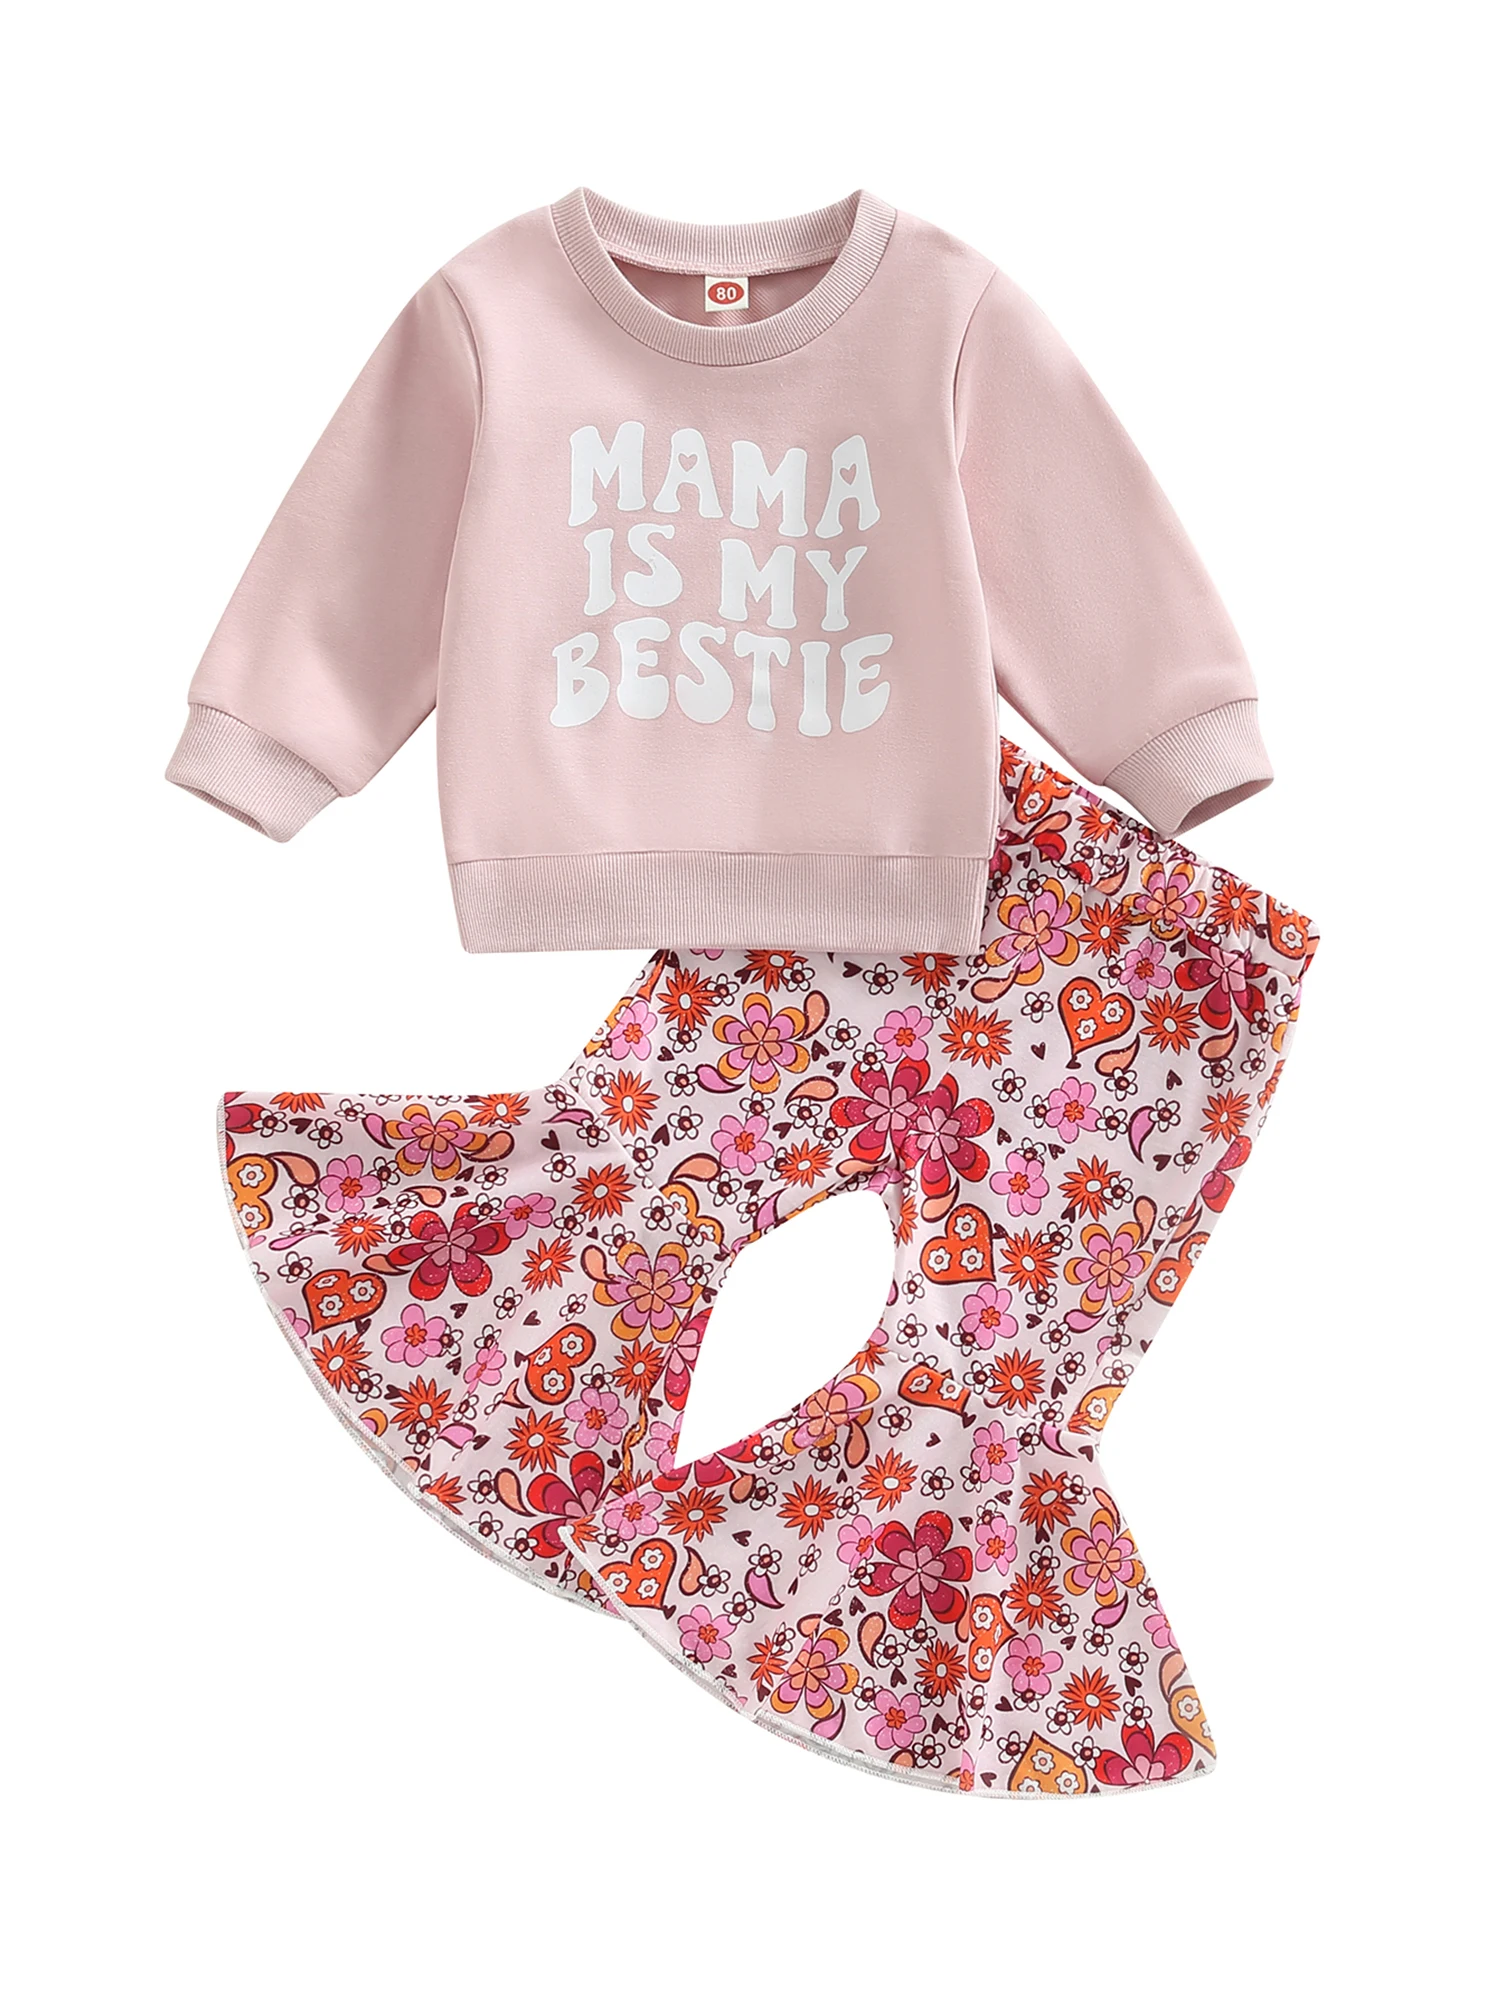 

Toddler Kid Baby Girl Valentines Day Outfit Besties Crewneck Sweatshirt Flared Pants 2Pcs Spring Outfit 6M-4T